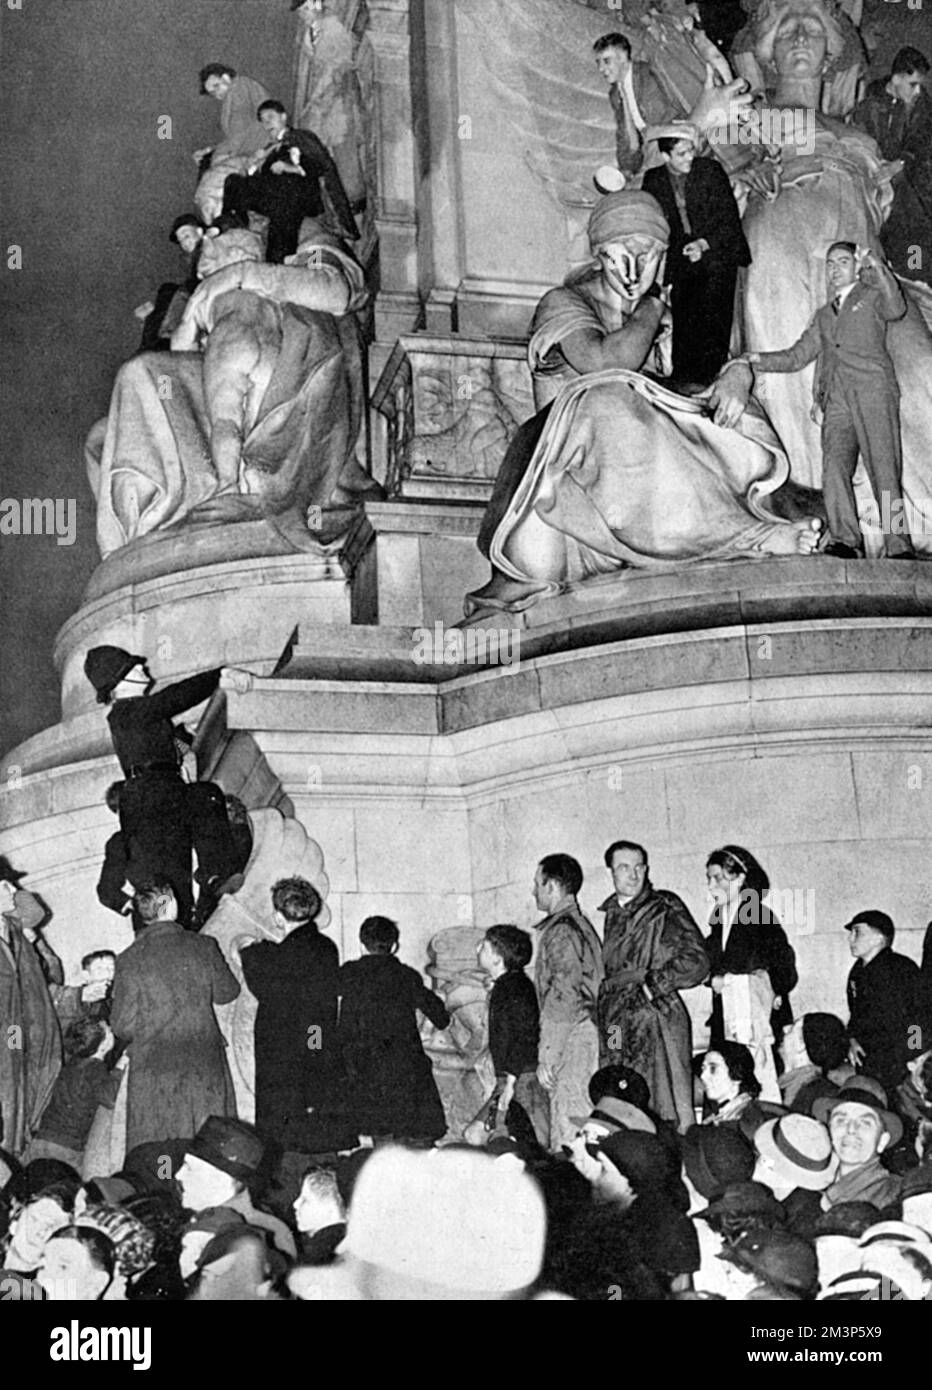 A section of the huge crowd in Trafalgar Square standing by the crush barrier after waiting all night to watch the Coronation procession of King George VI.  By 2am the square was almost full and long before the first procession the gates had to be closed.  Note the policeman in the background, climbing on one of the Trafalgar Square lions, presumably to shoo away climbers!     Date: 1937 Stock Photo